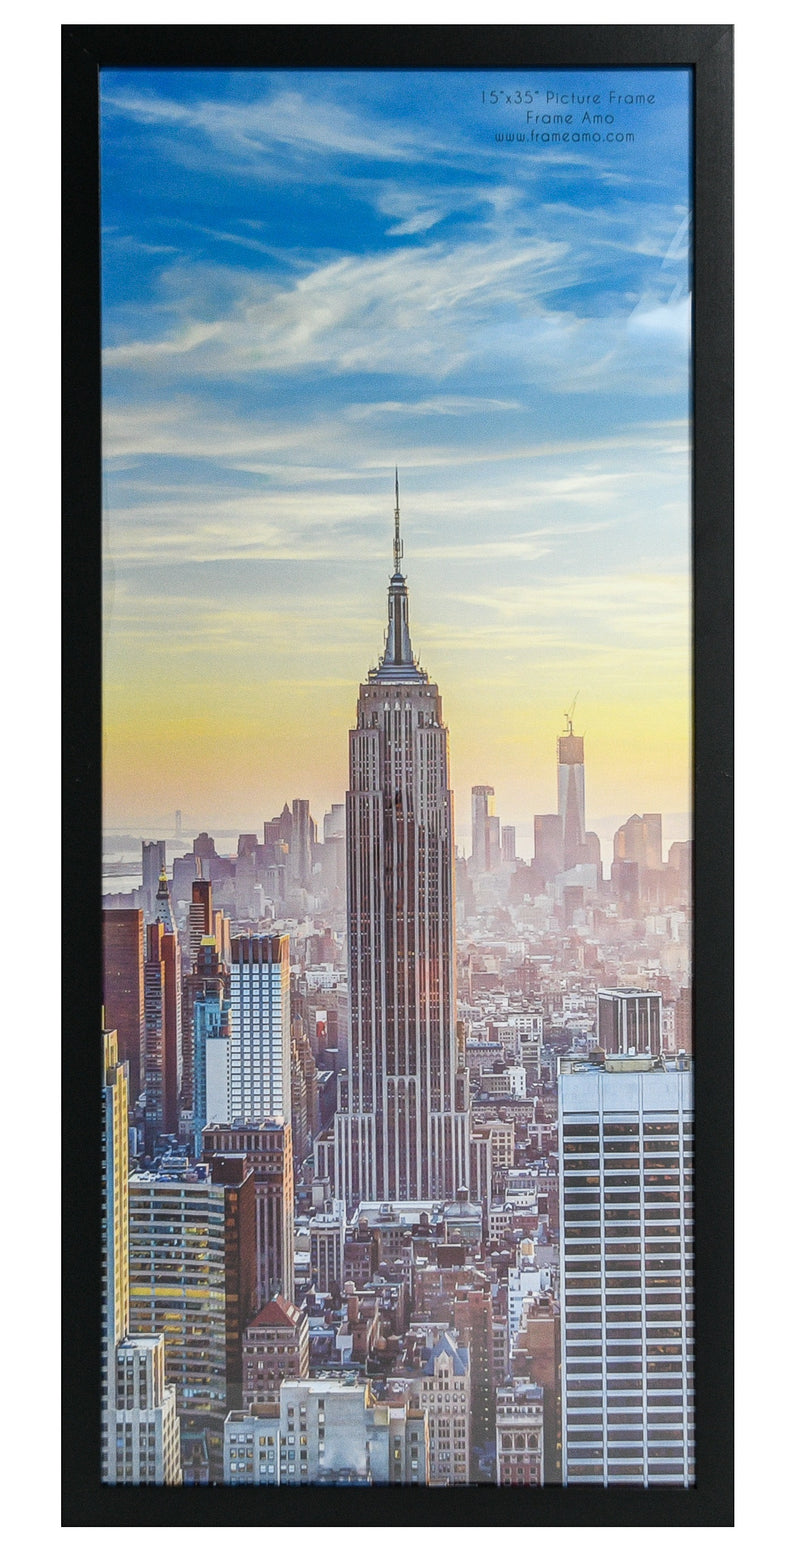 15x35 Black Modern Picture or Poster Frame, 1 inch Wide Border, Acrylic Front